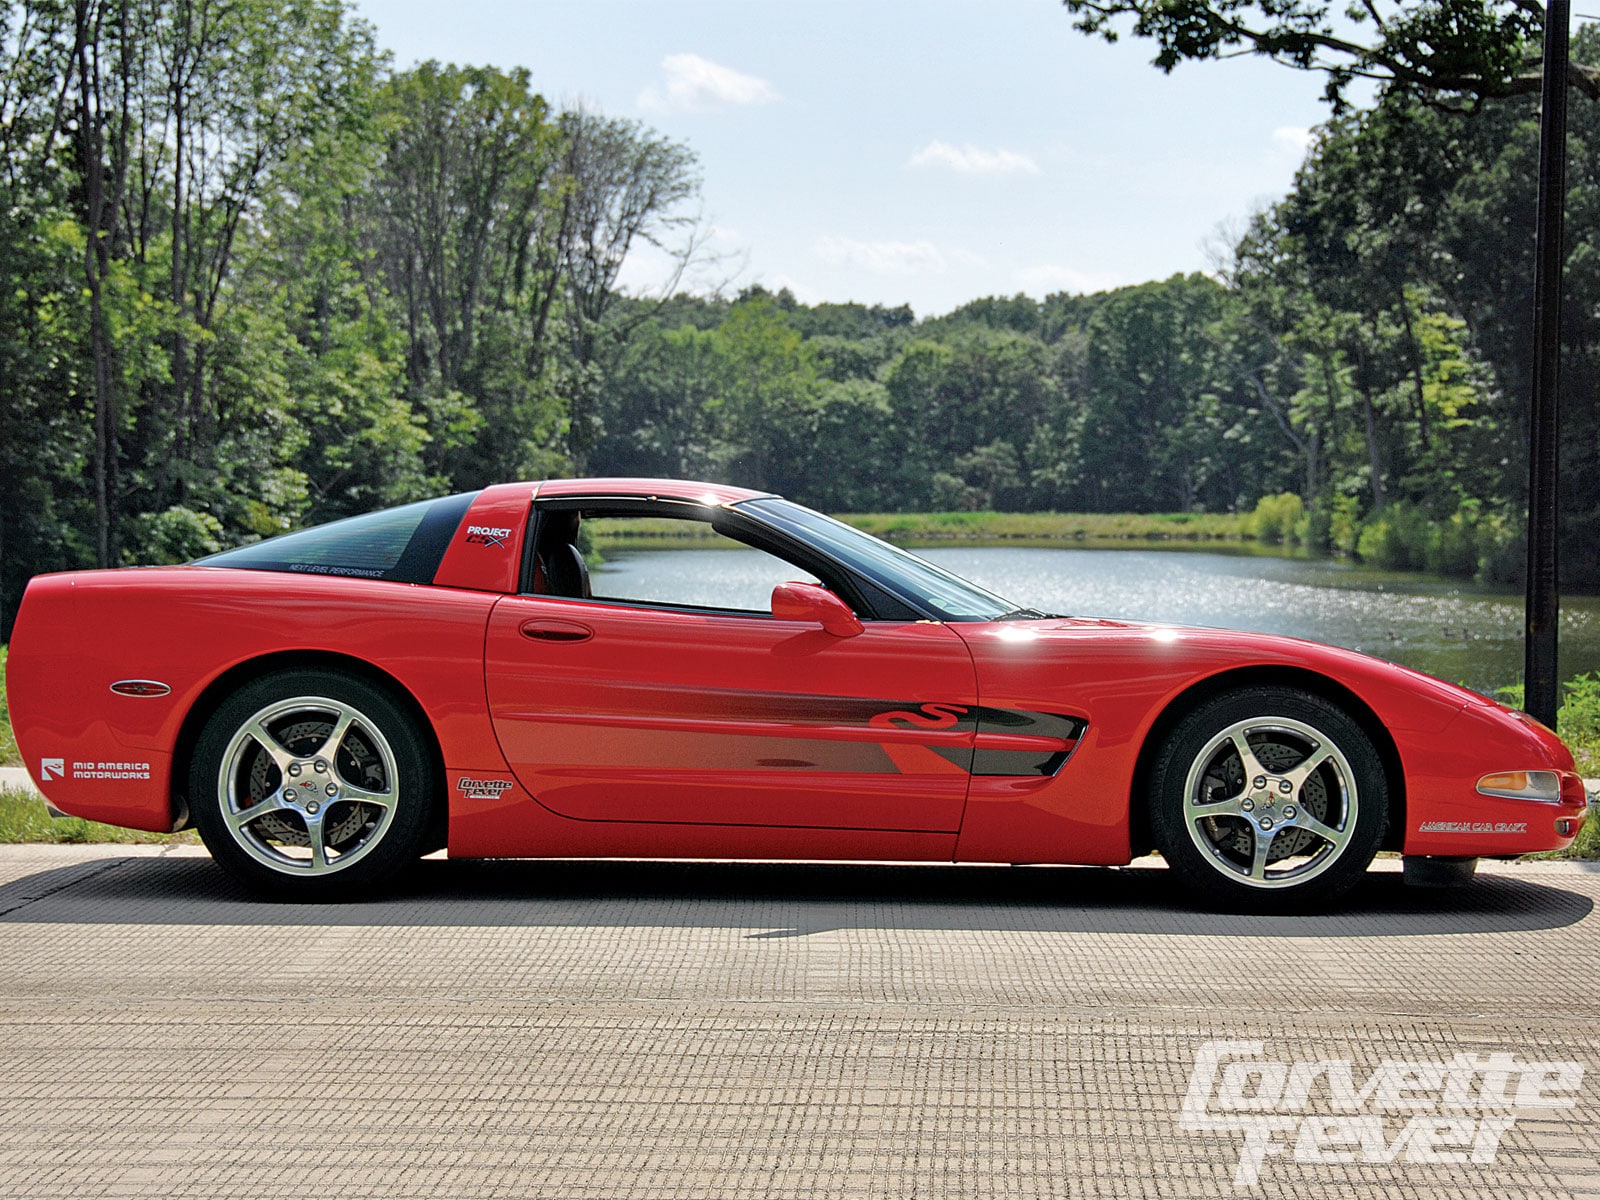 2000 Chevrolet Corvette - The End Of The Road